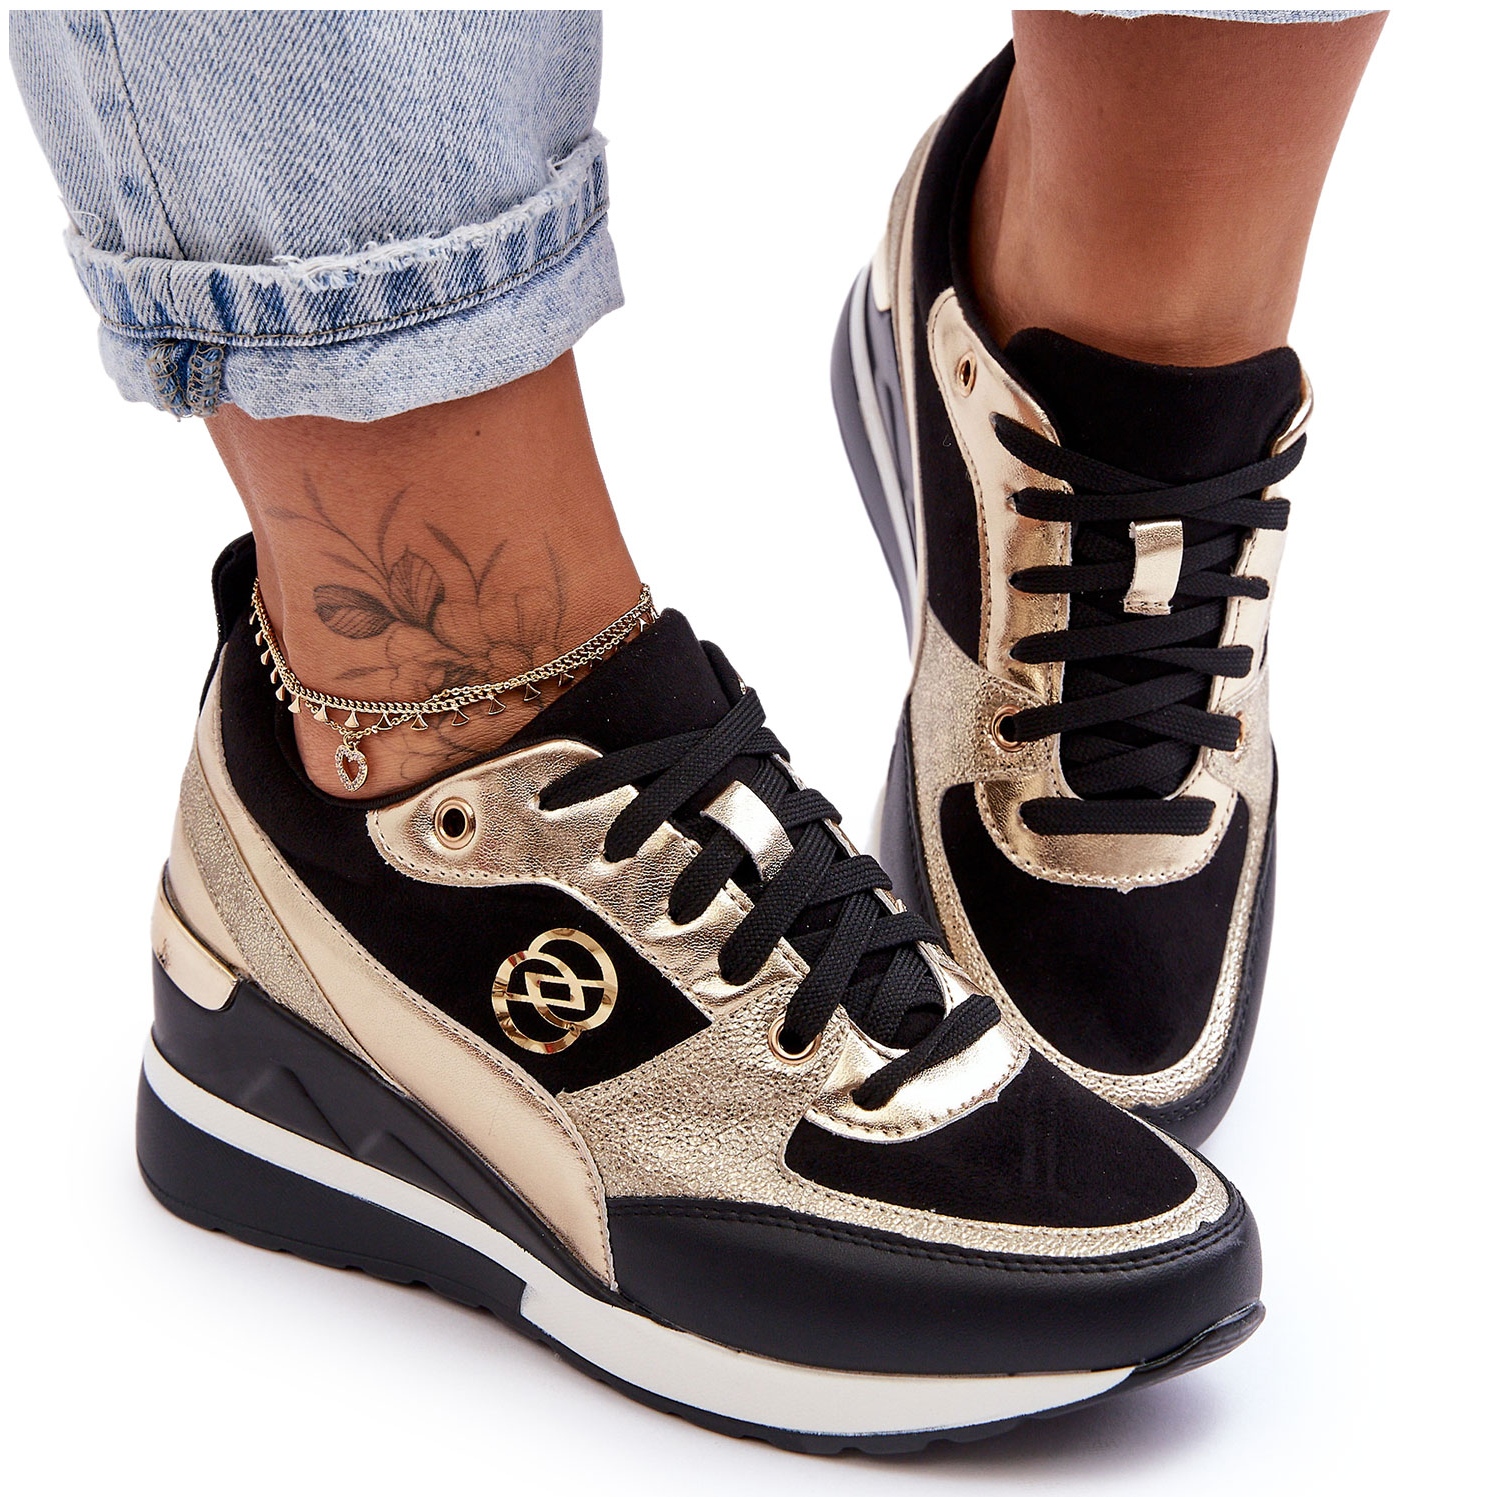 Ash Bowie Lace Up Wedge Sneakers | Bloomingdale's